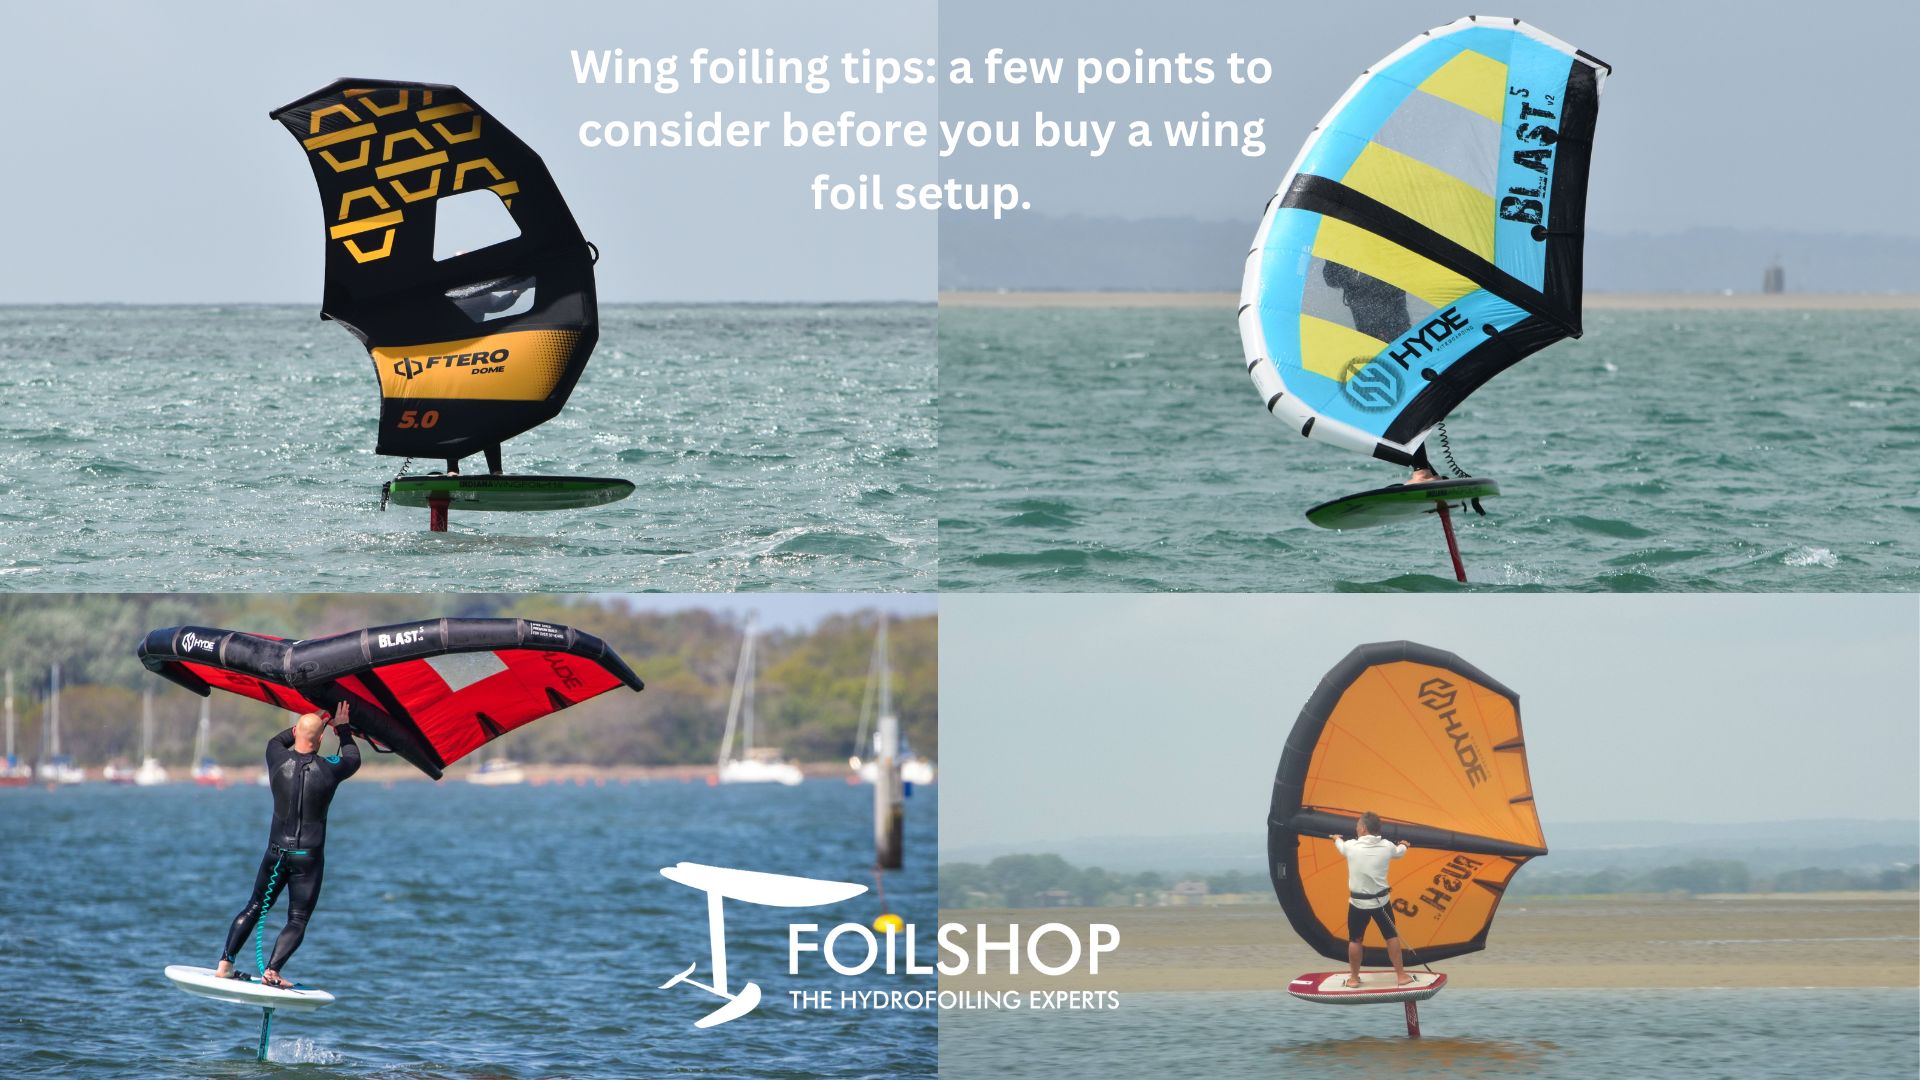 Wing foiling tips: points to consider before you buy a wing foil setup.